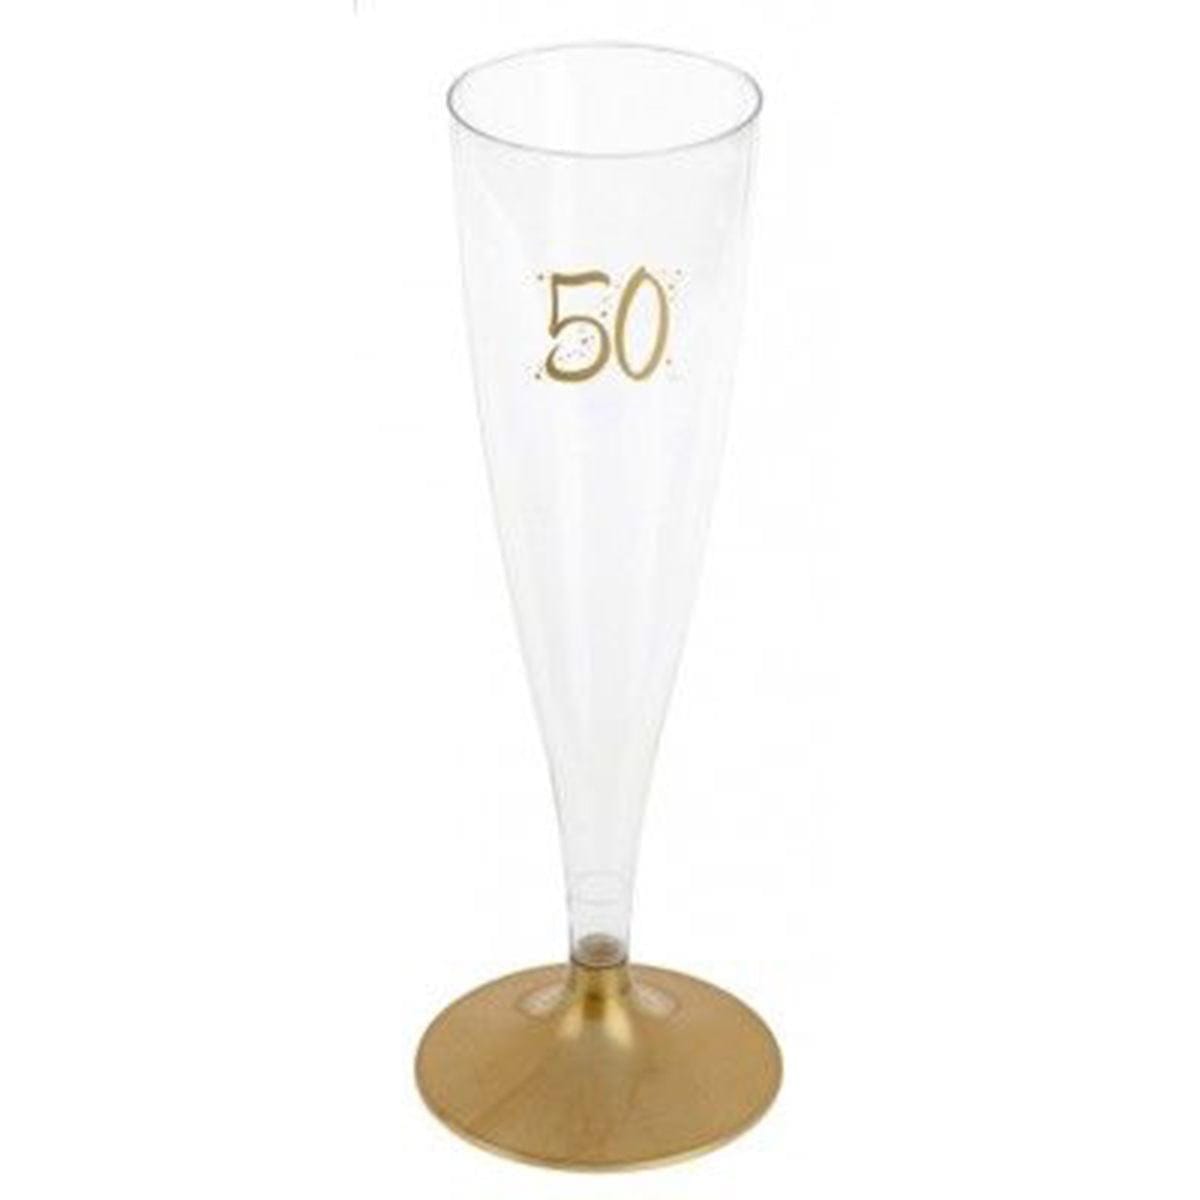 SANTEX Age Specific Birthday 50th Birthday Champagne Flute, Gold, 6 Count